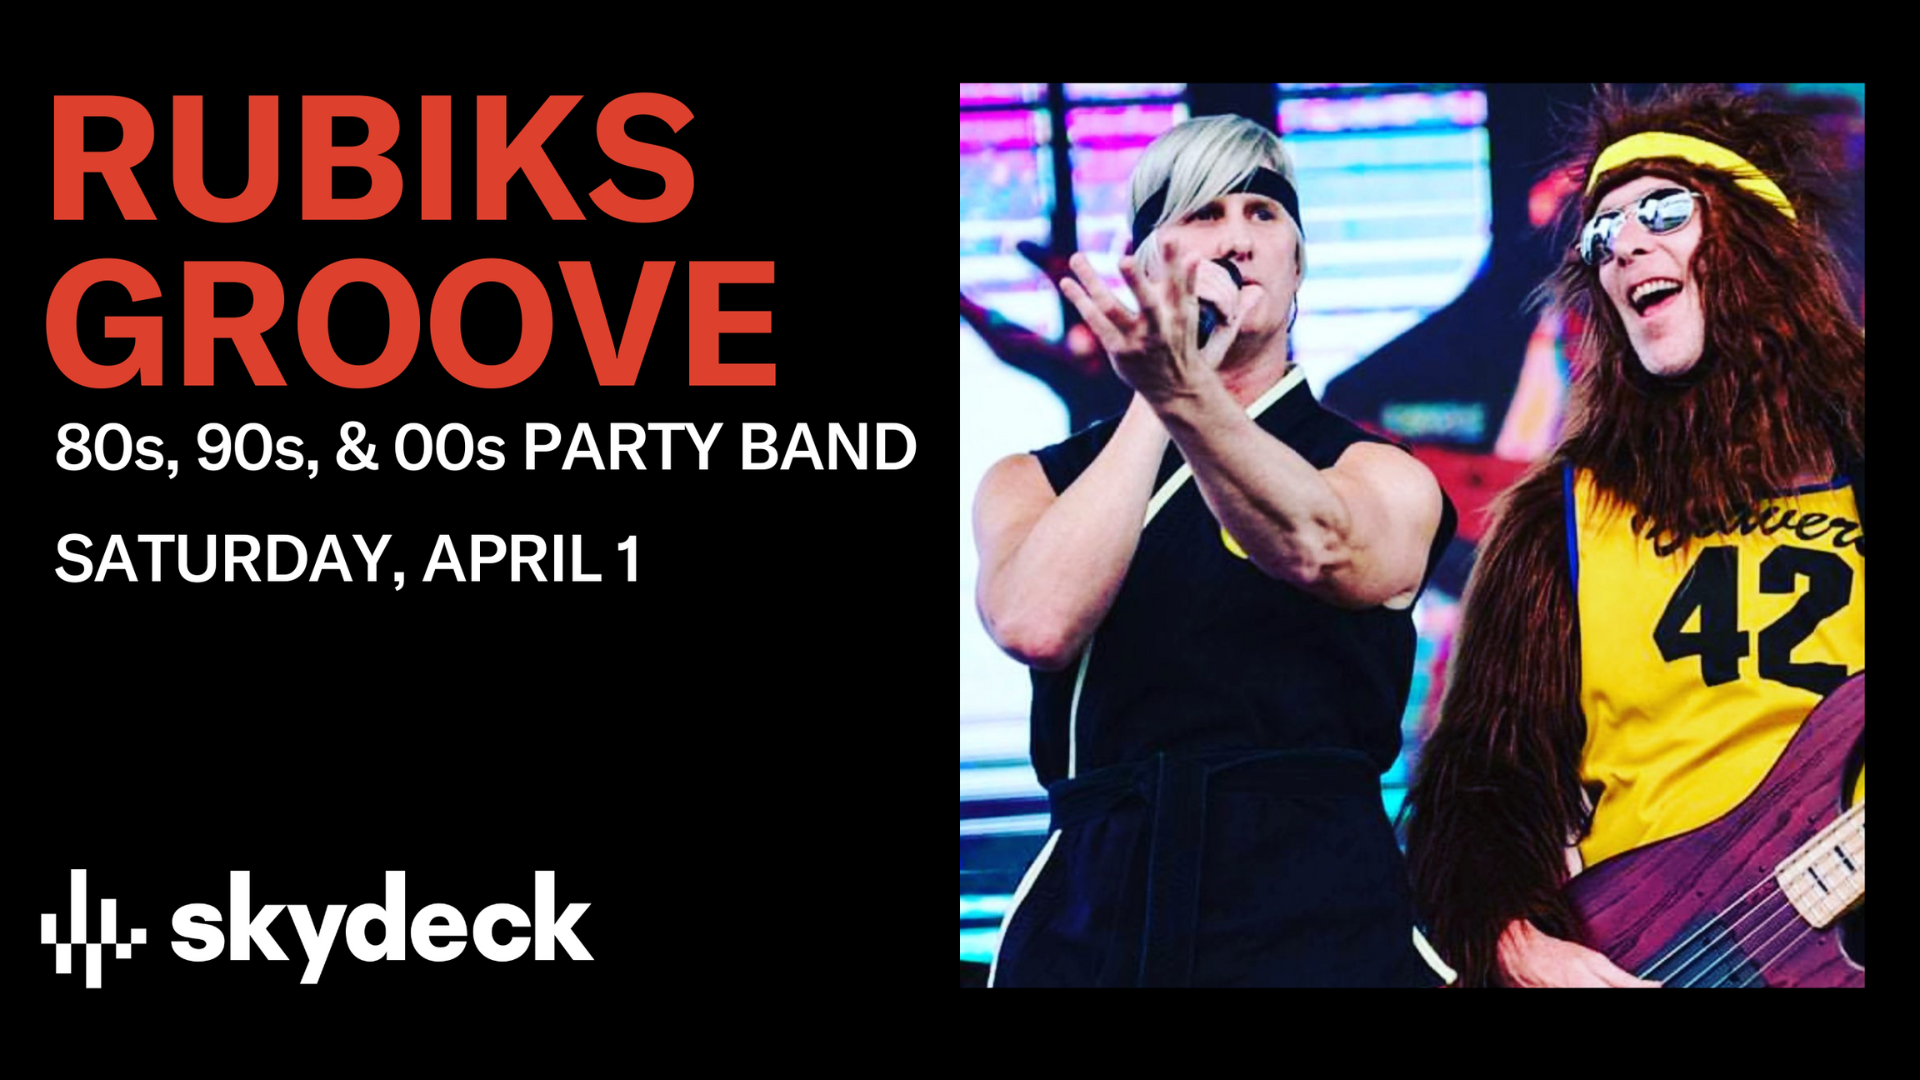 80s, 90s, & 00s Party Band: Rubiks Groove on Skydeck - hero